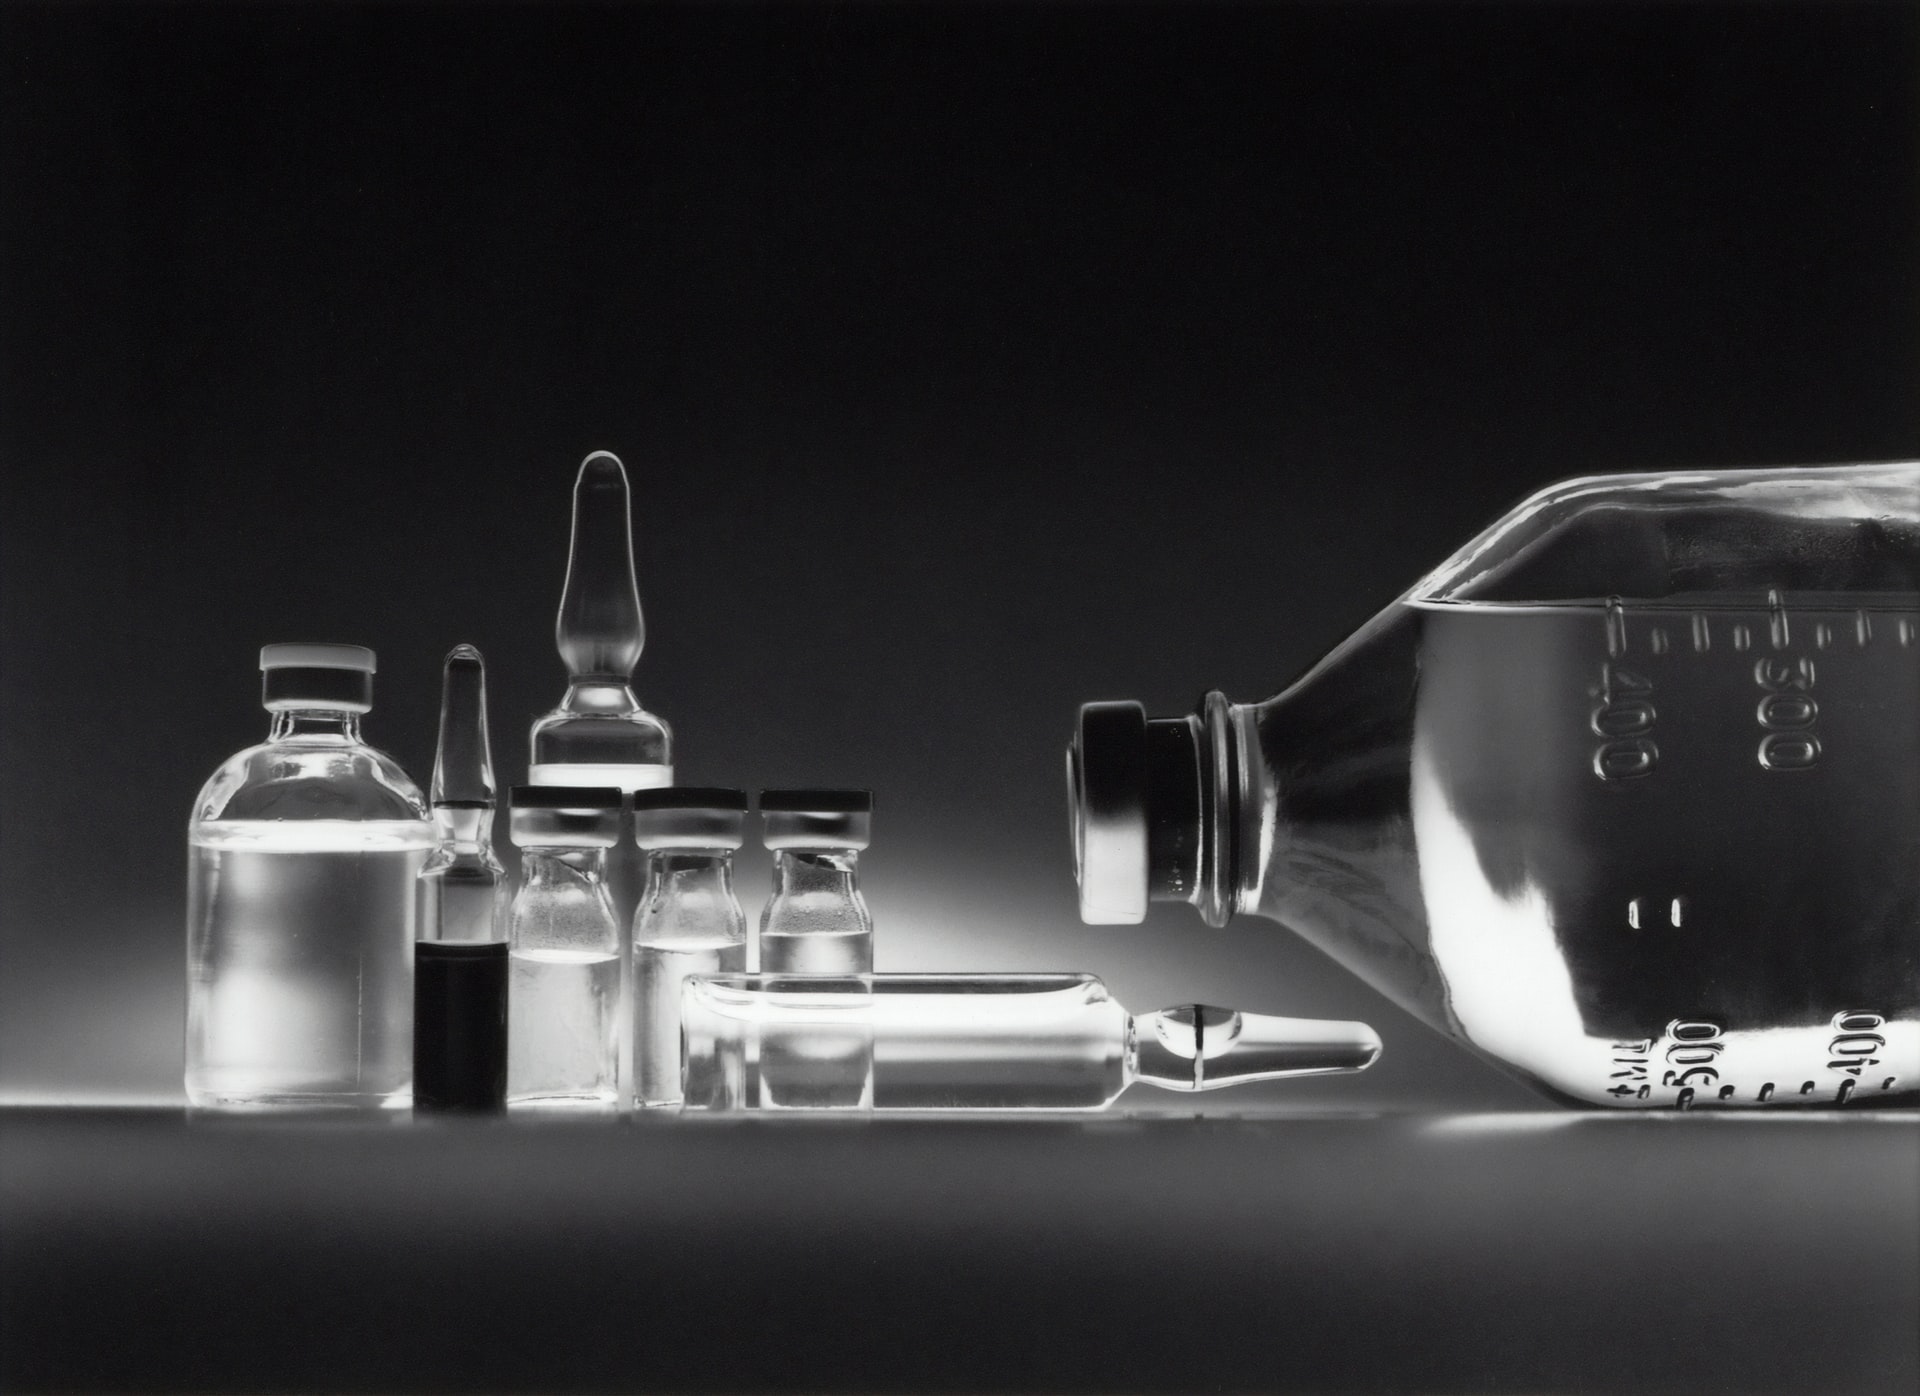 Oral vaccines photographed in black and white